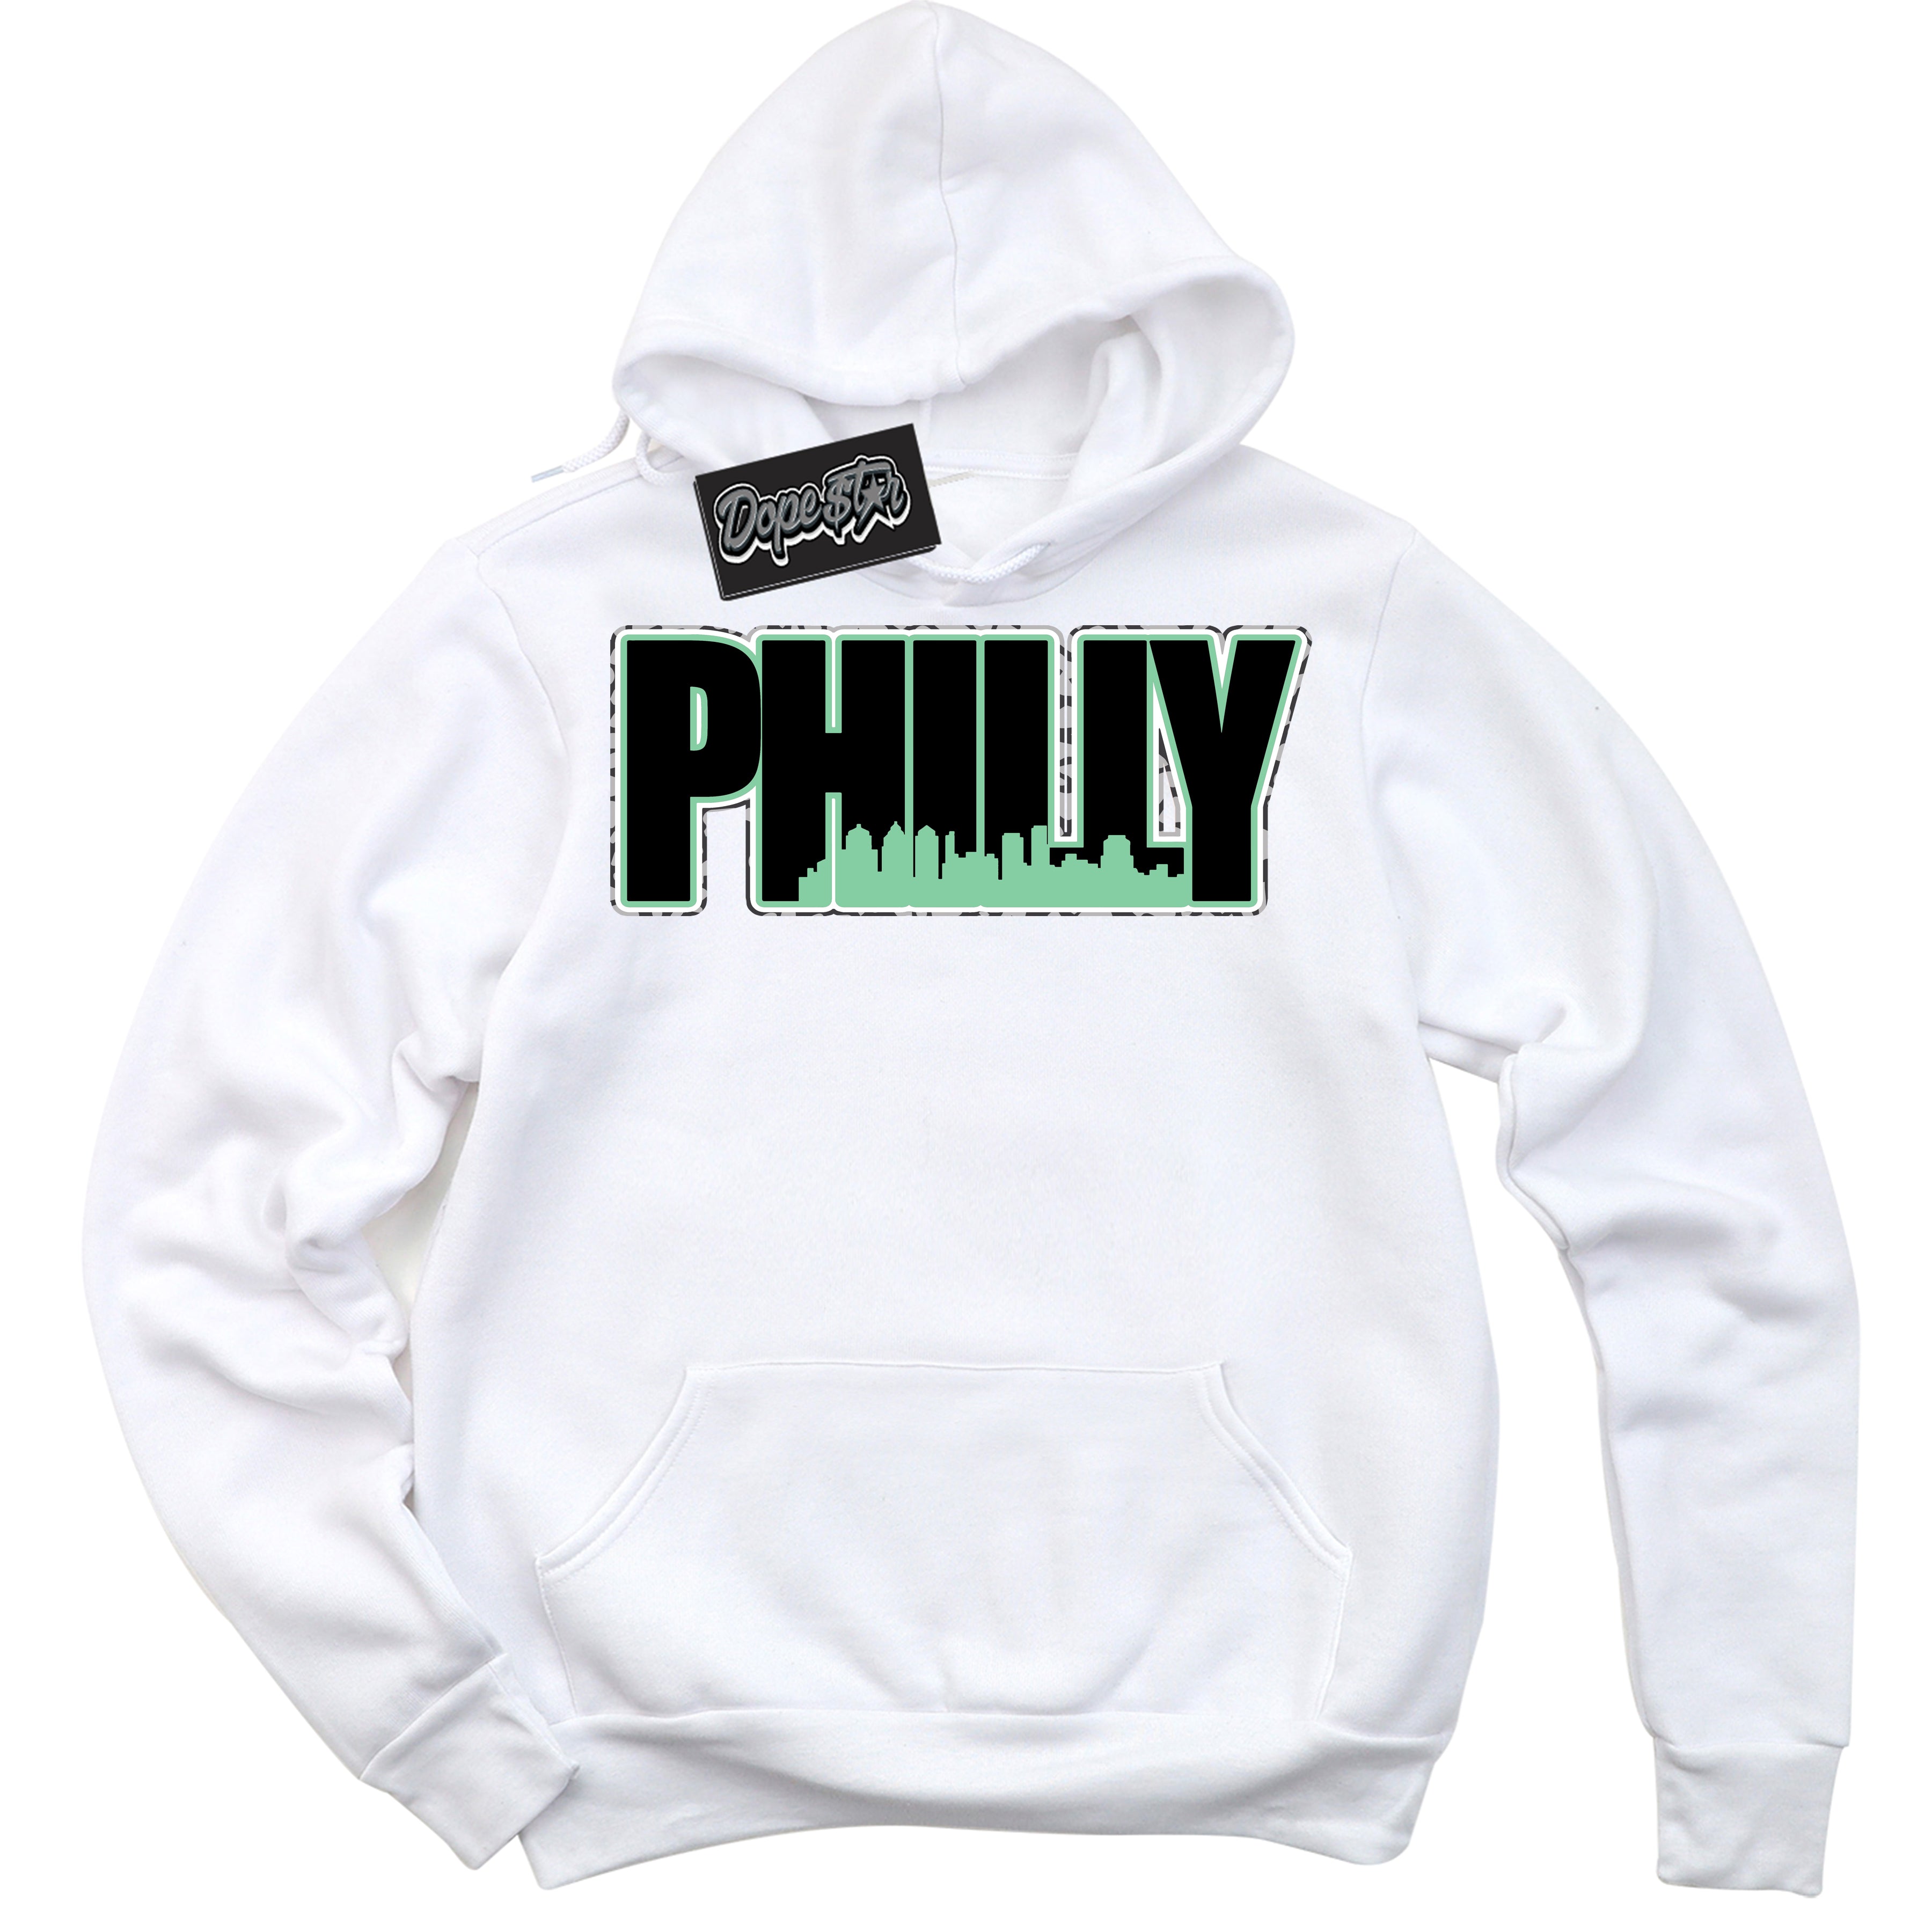 Cool White Graphic DopeStar Hoodie with “ Philly “ print, that perfectly matches Green Glow 3s sneakers